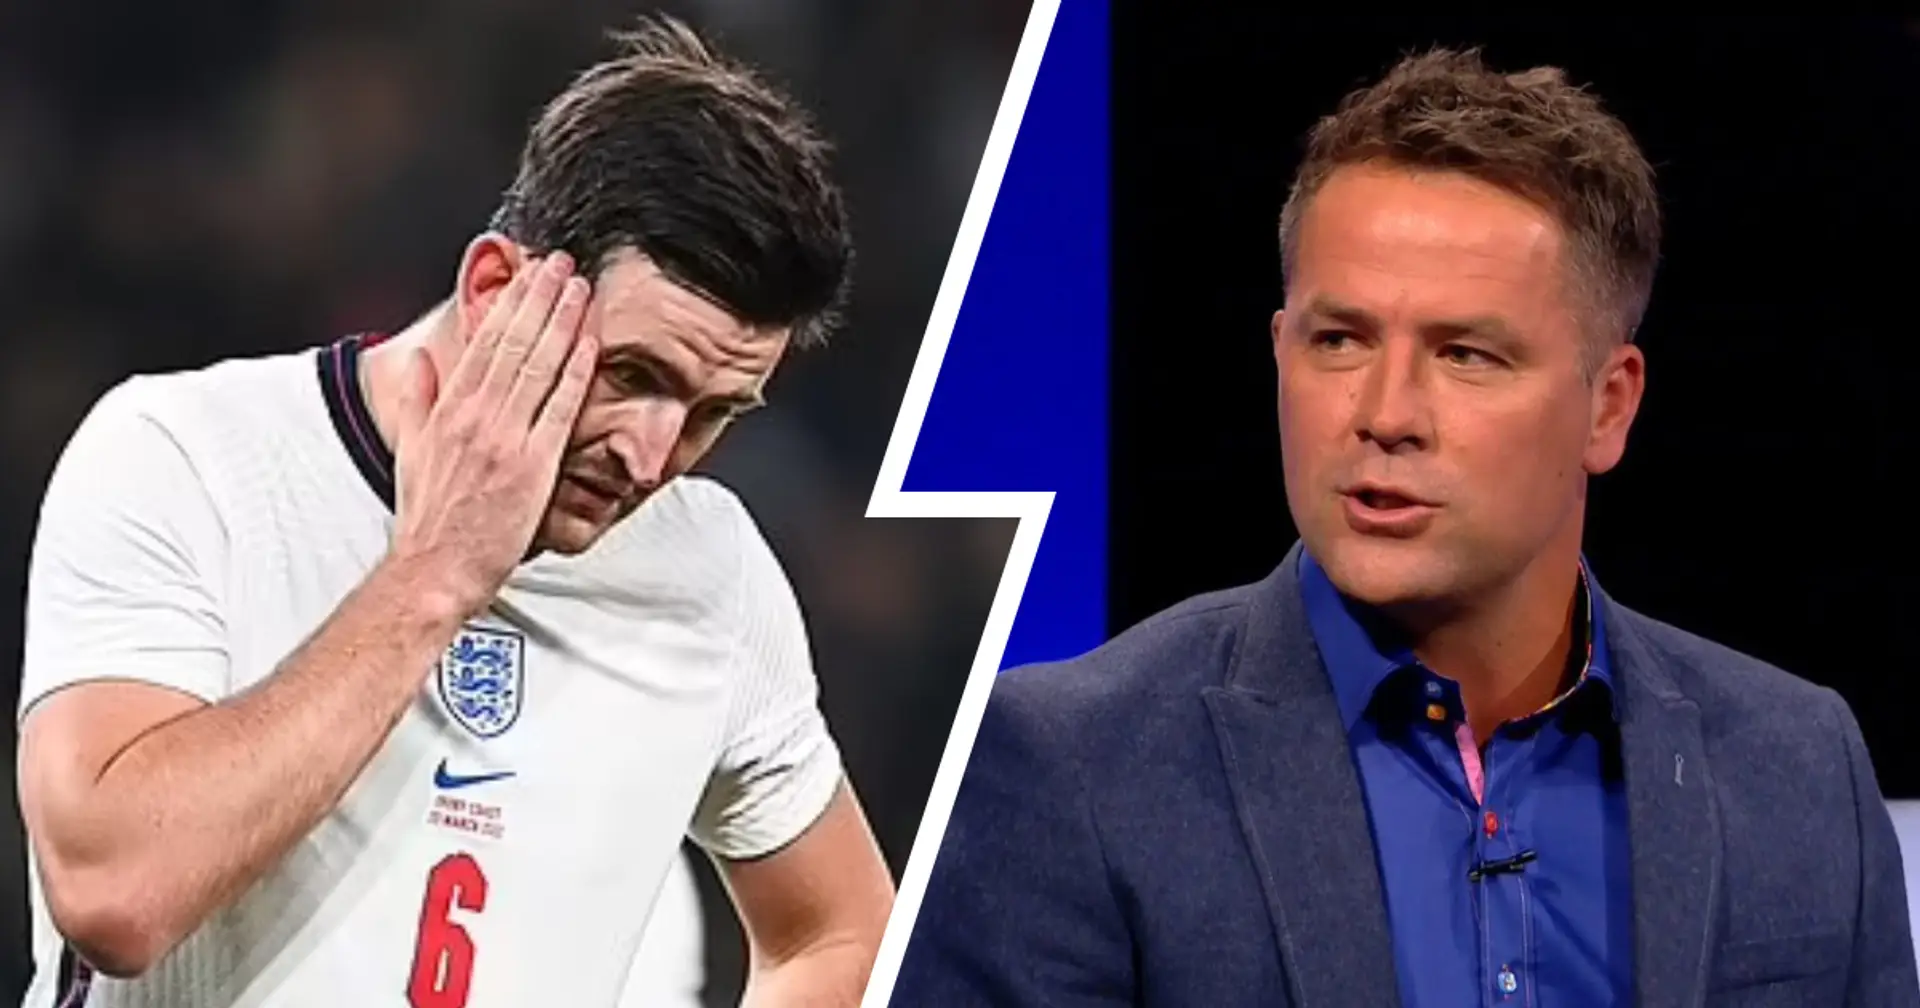 'A very good player and a decent person': Michael Owen speaks out in Harry Maguire's defence